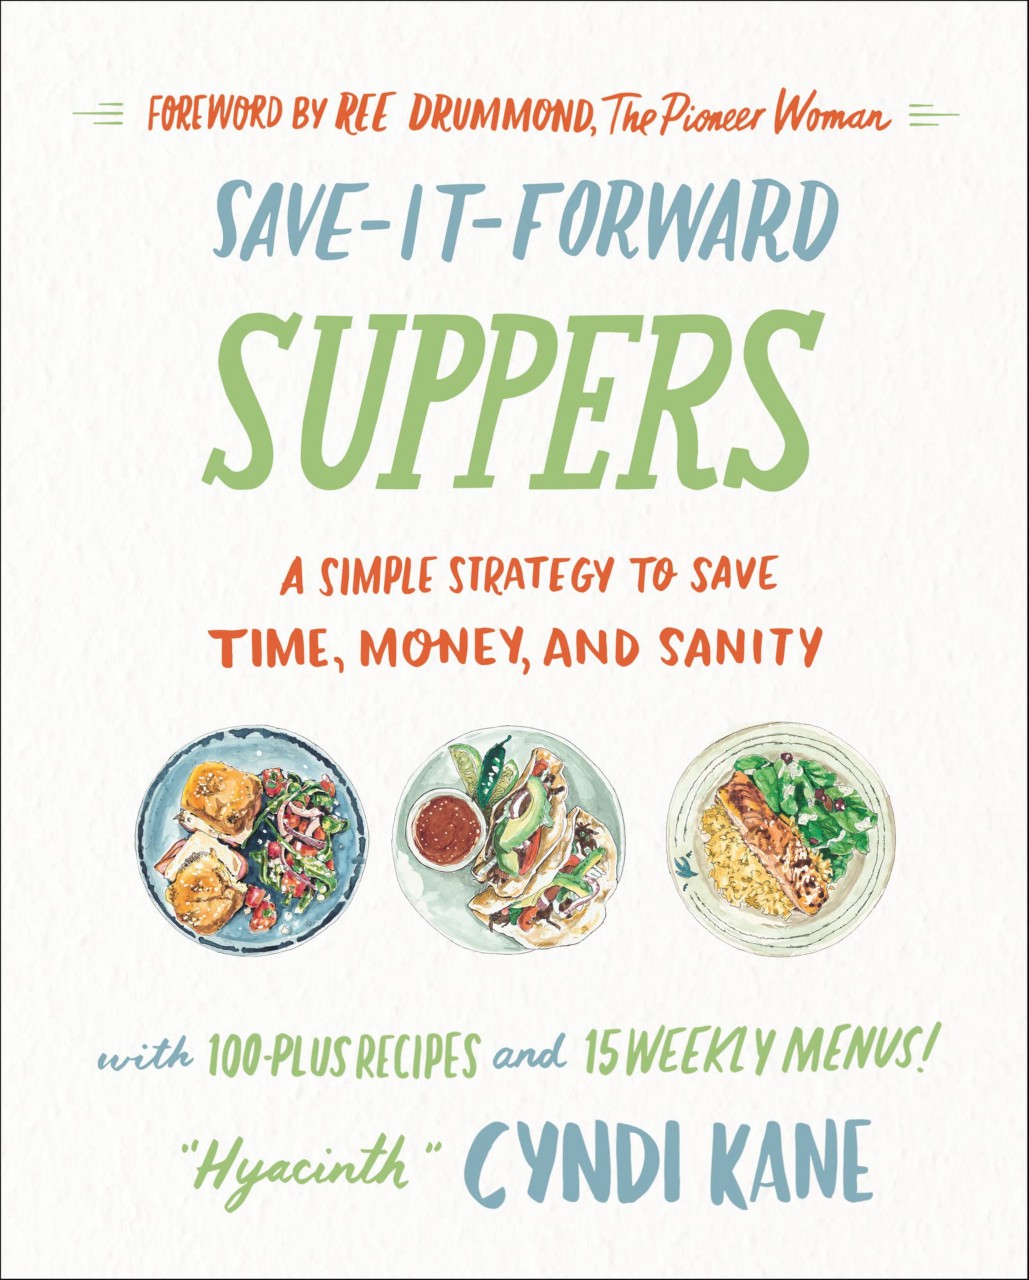 Save-It-Forward-Suppers: A Simple Strategy to Save Time, Money, and Sanity illustrated by Jeannine Bulleigh